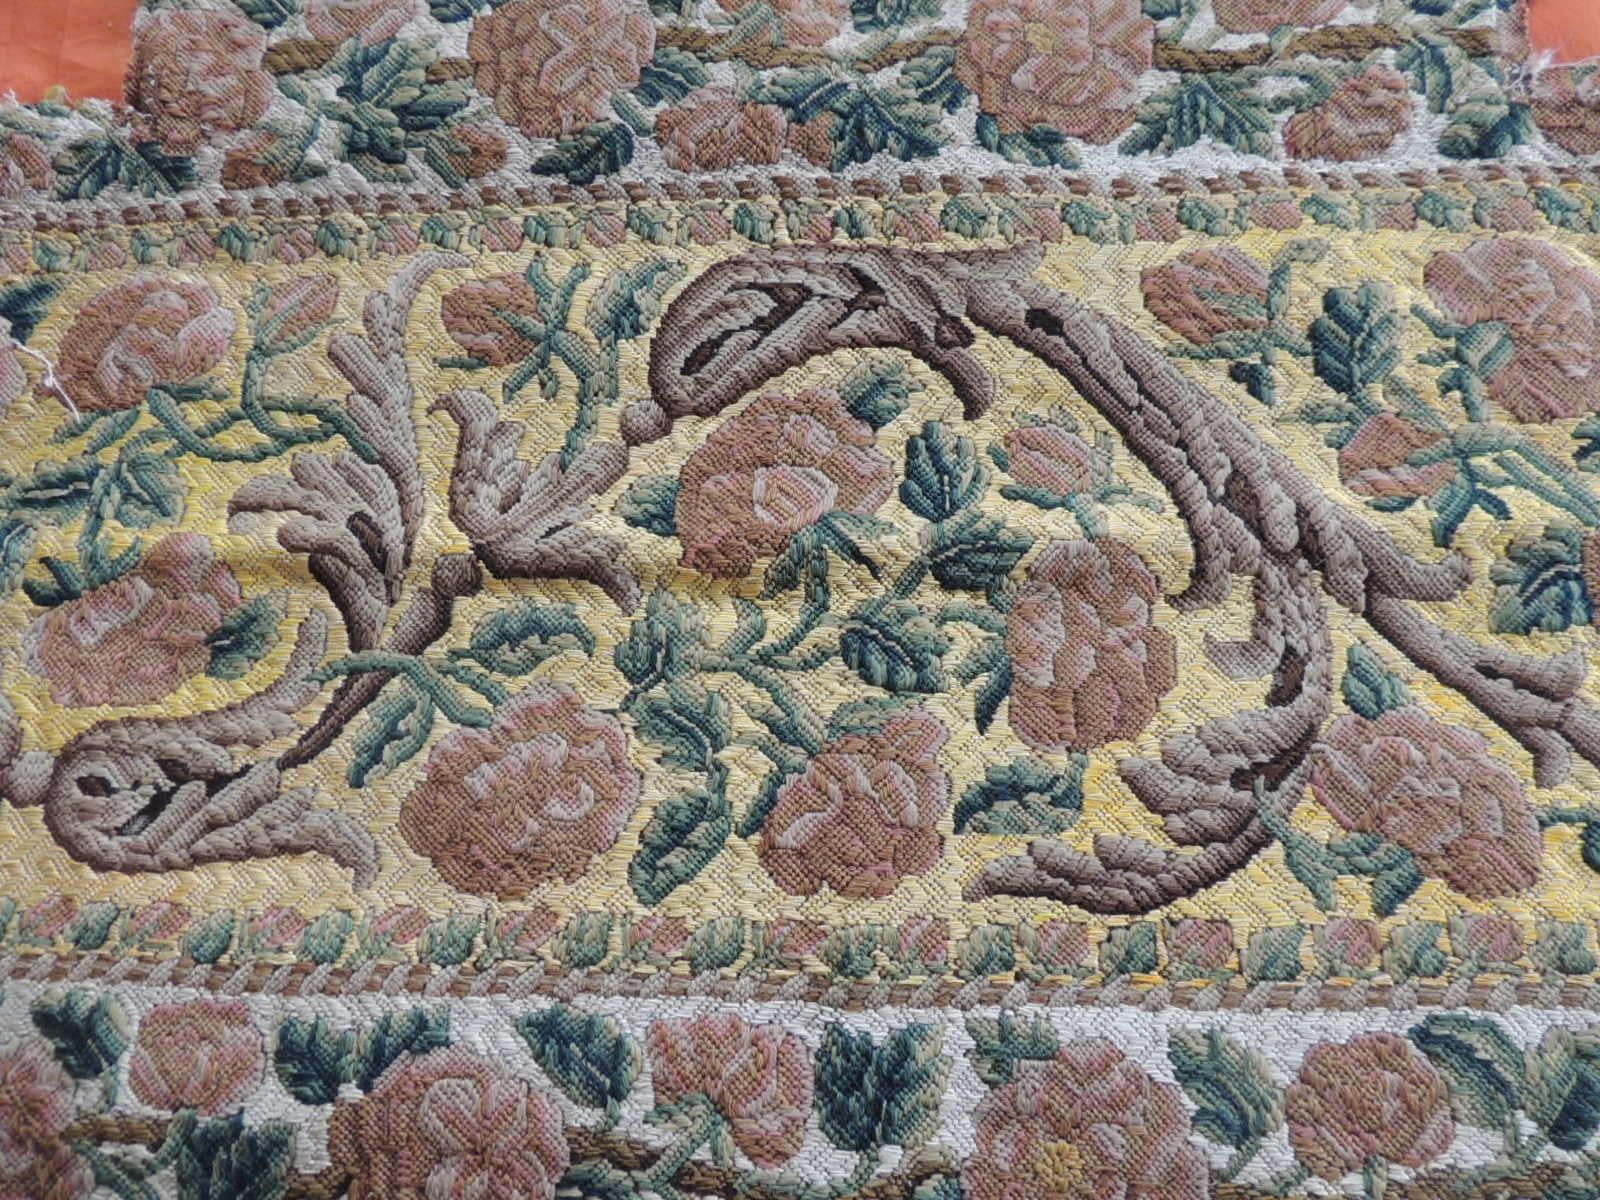 Antique Italian needlework tapestry floral panel.
Green and yellow silk tapestry panel, depicting flowers and vines.
Ideal for pillows or upholstery.
Sold as is.
Size: 20